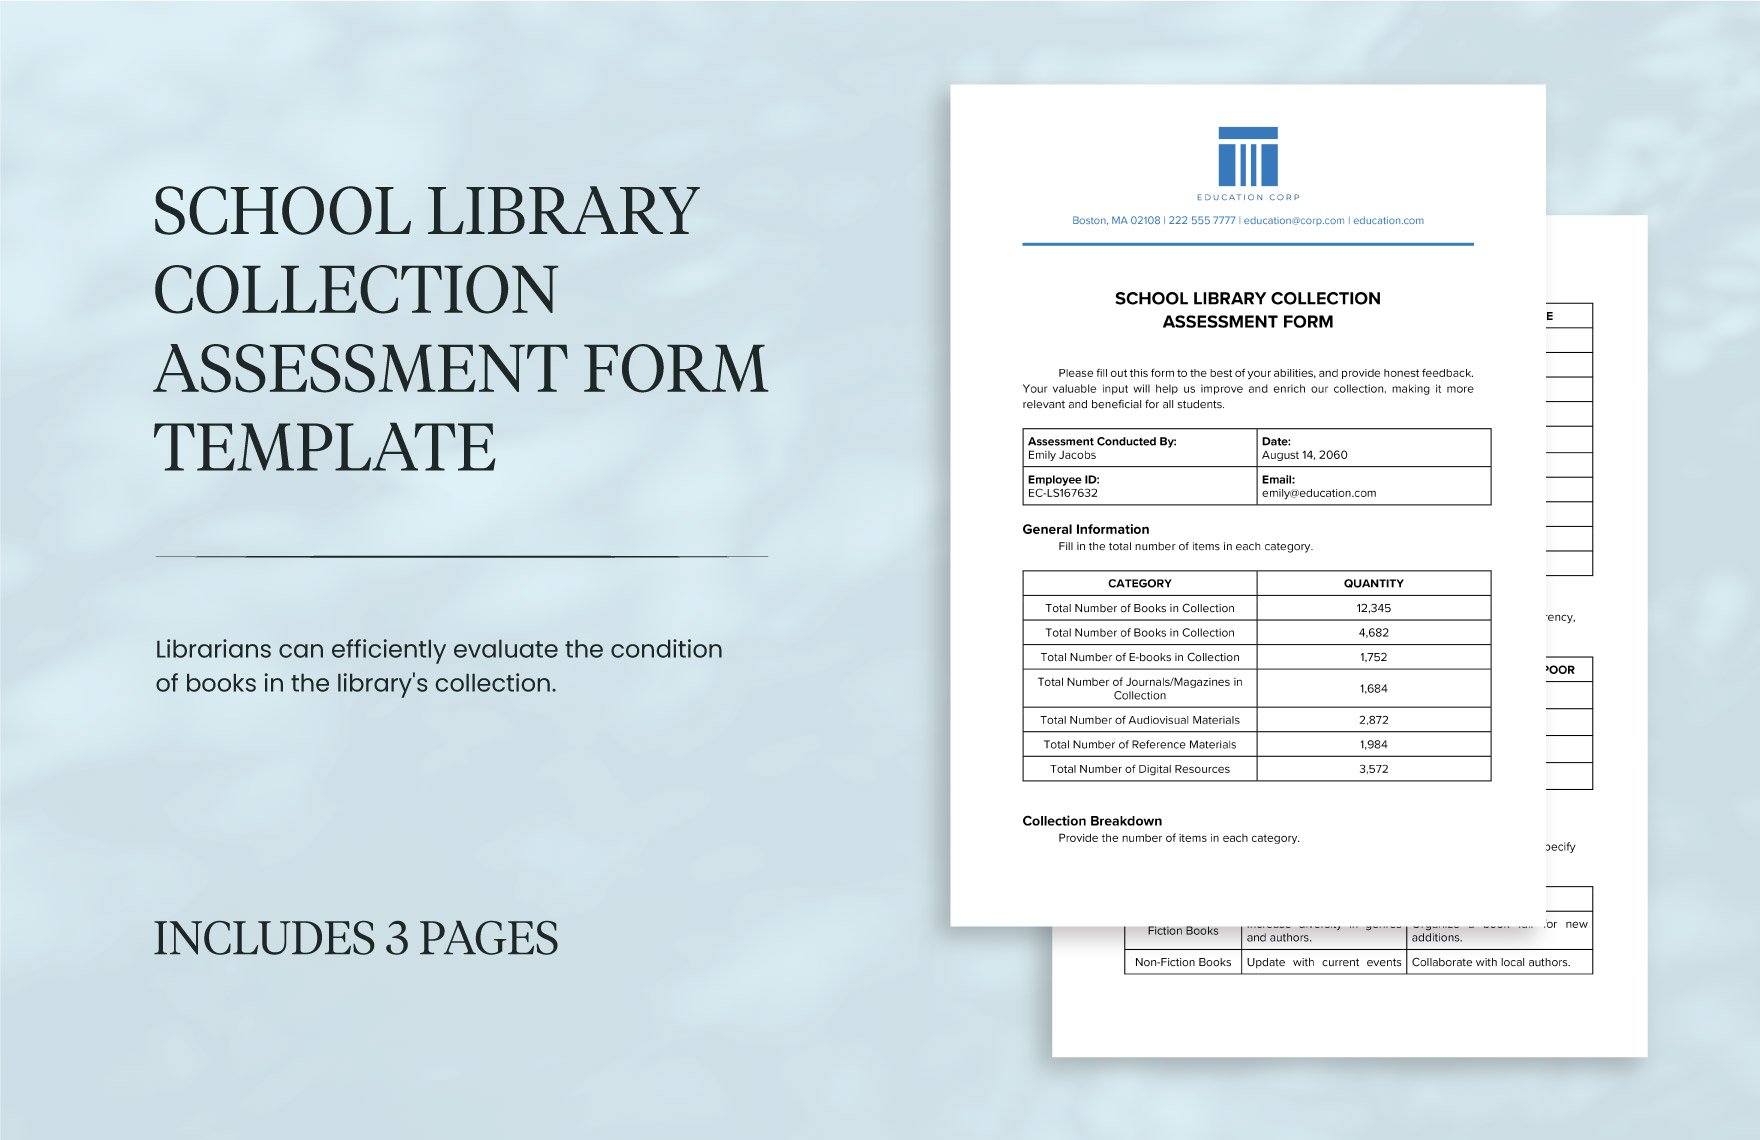 School Library Collection Assessment Form Template